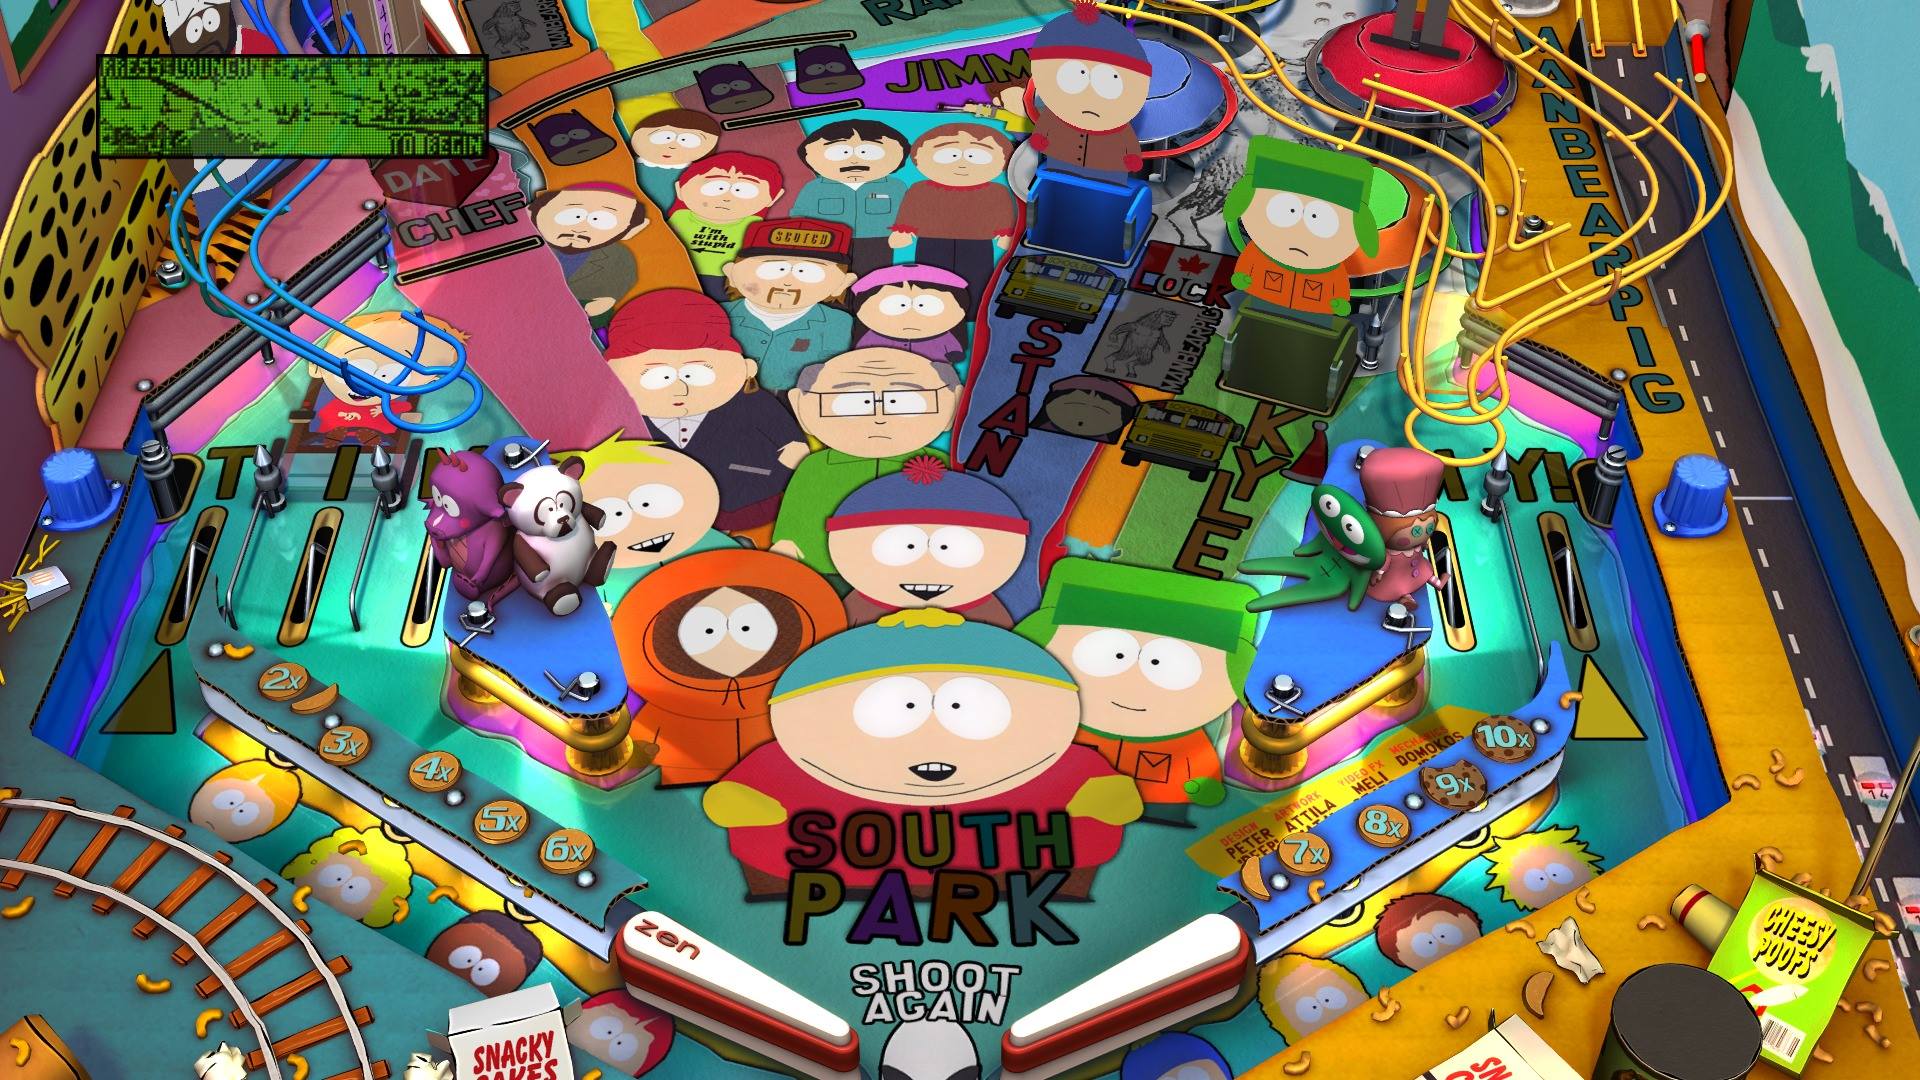 Come on Down to South Park